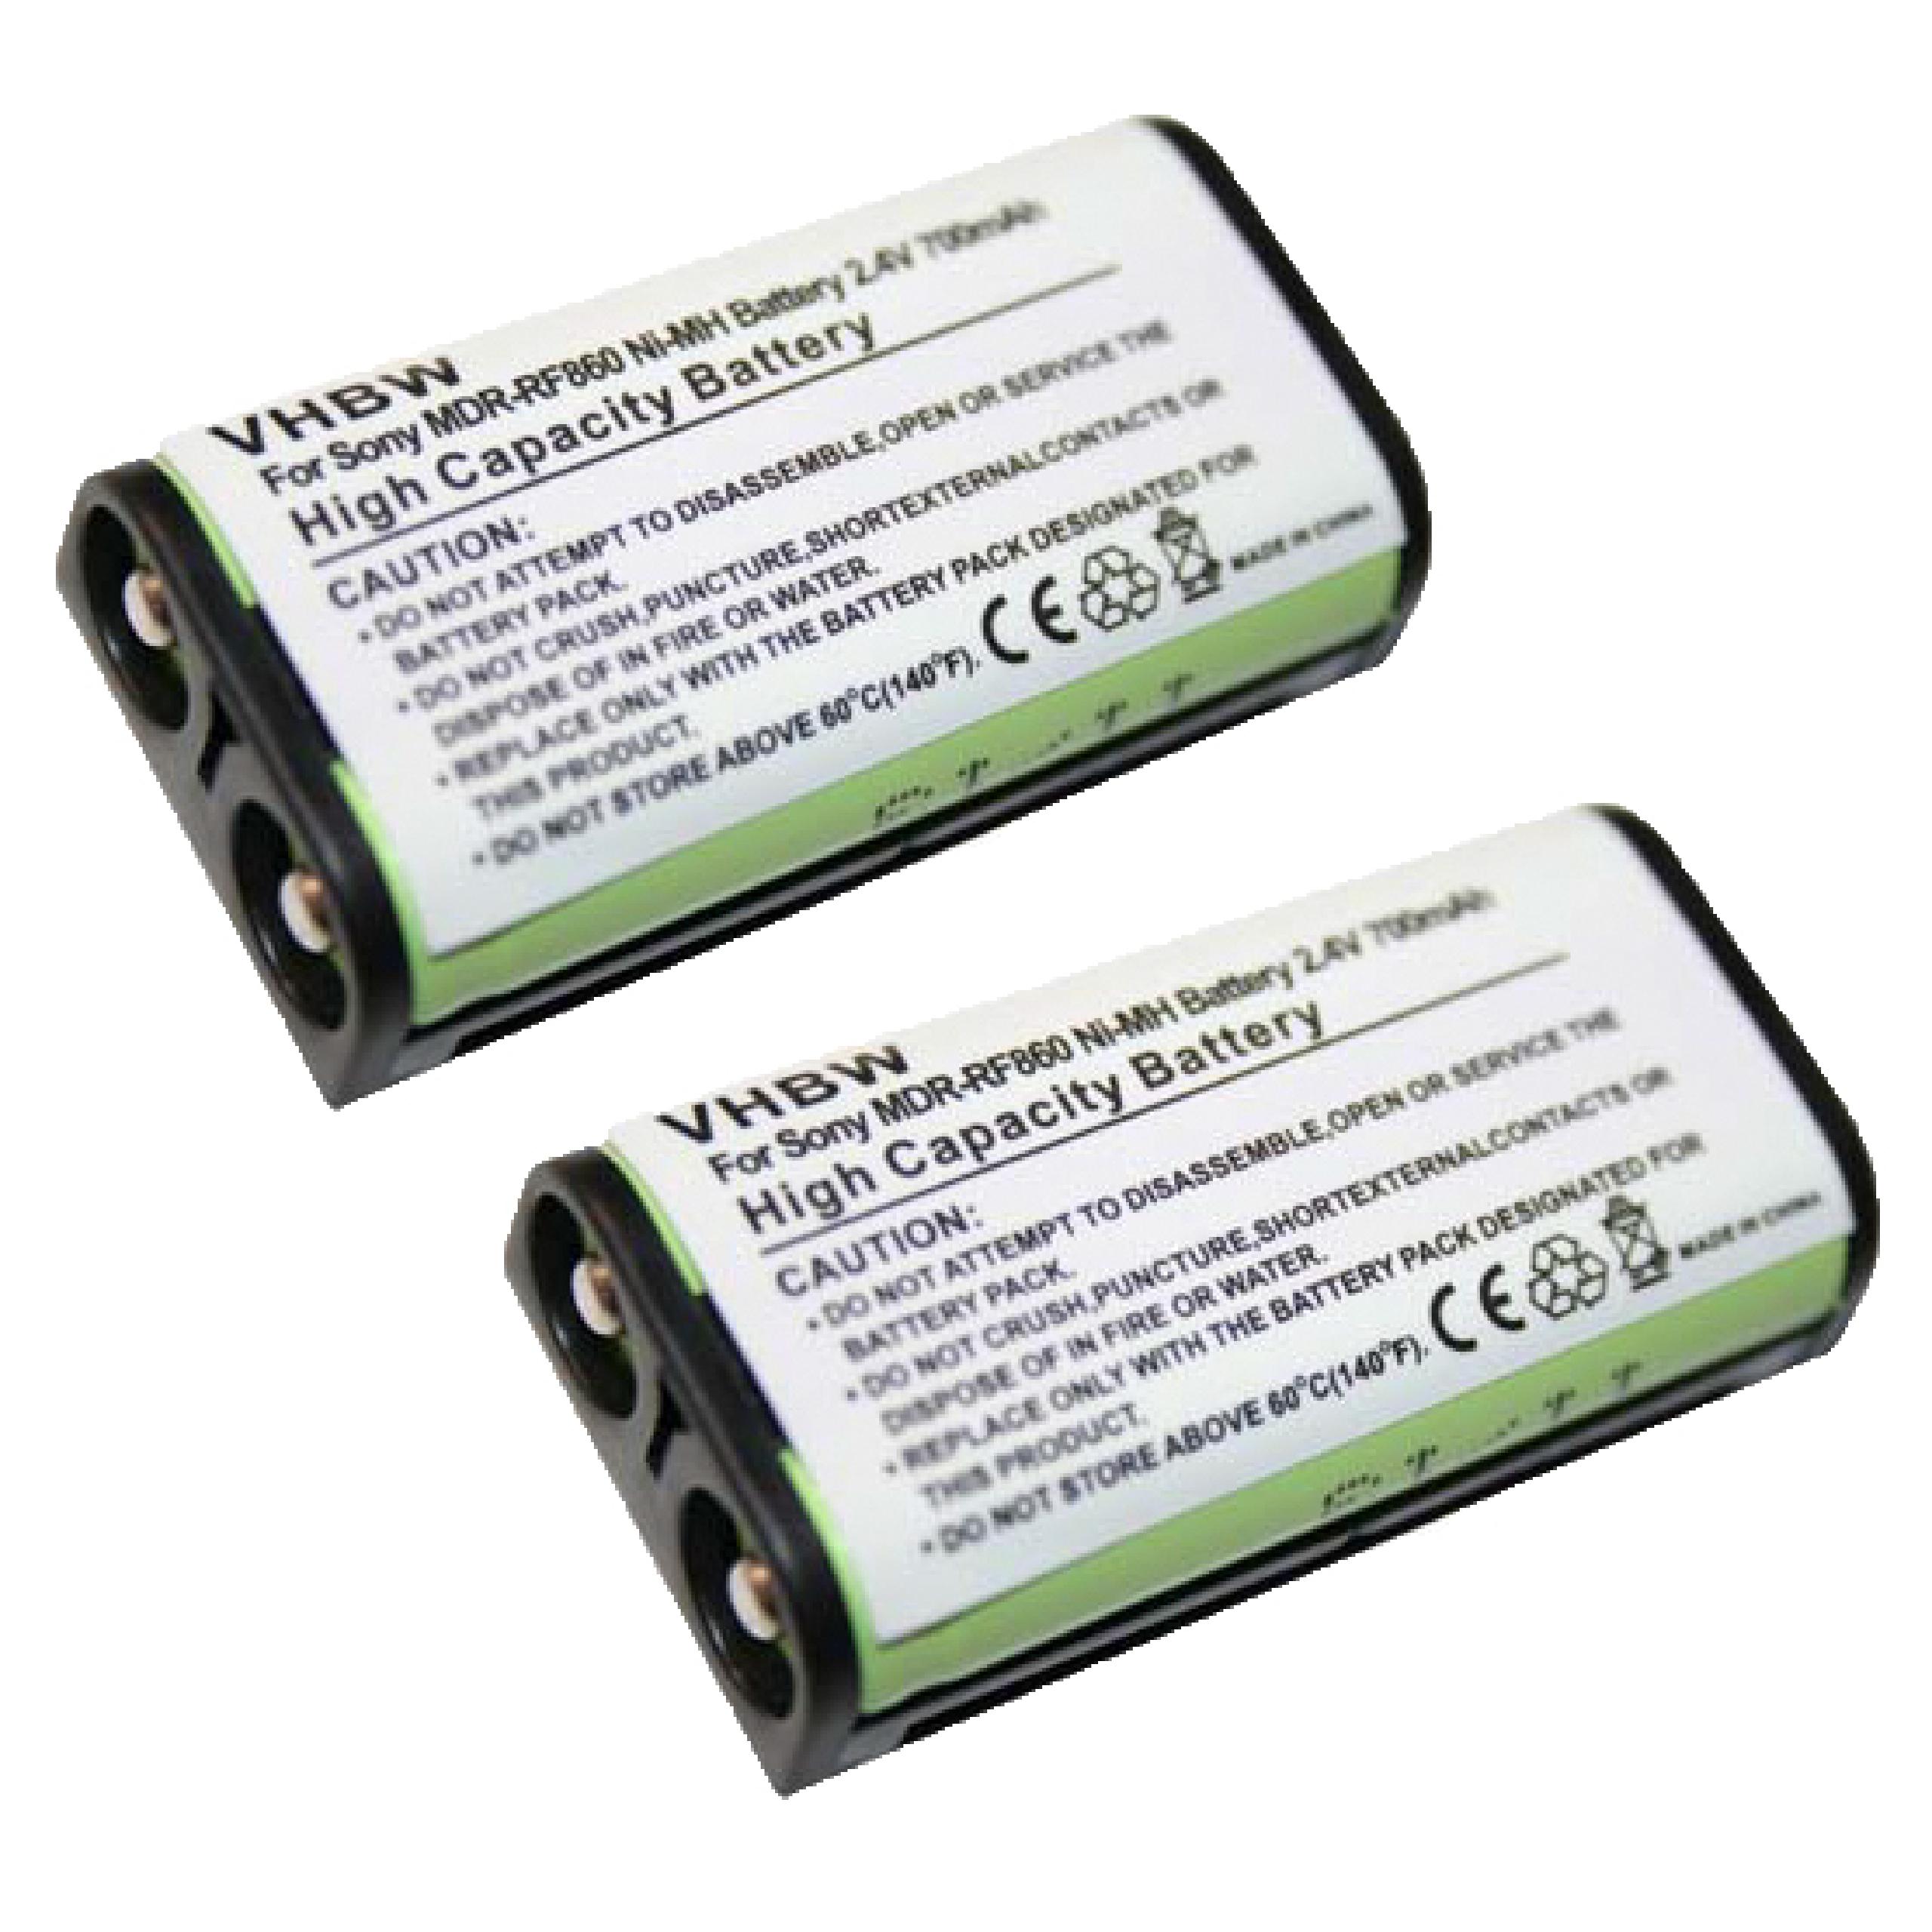 Wireless Headset Battery (2 Units) Replacement for Sony BP-HP550-11 - 700mAh 2.4V NiMH